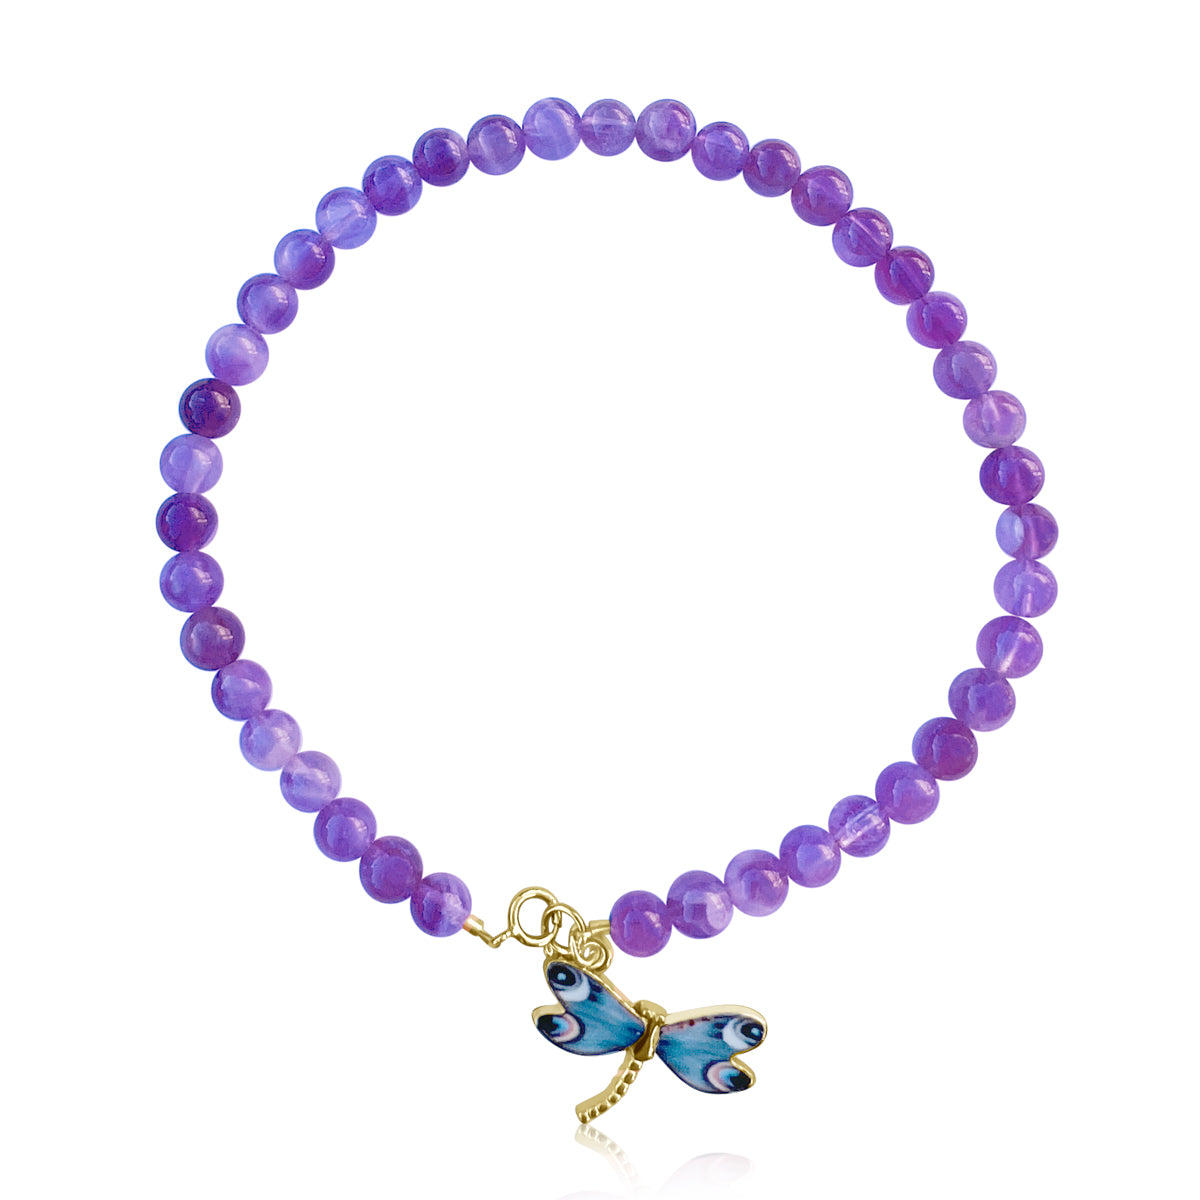 Step into the realm of spiritual awakening with the Dragonfly Whispers - Amethyst Anklet, a symbol of inner peace and intuition, guiding you to tread your path with clarity and wisdom.